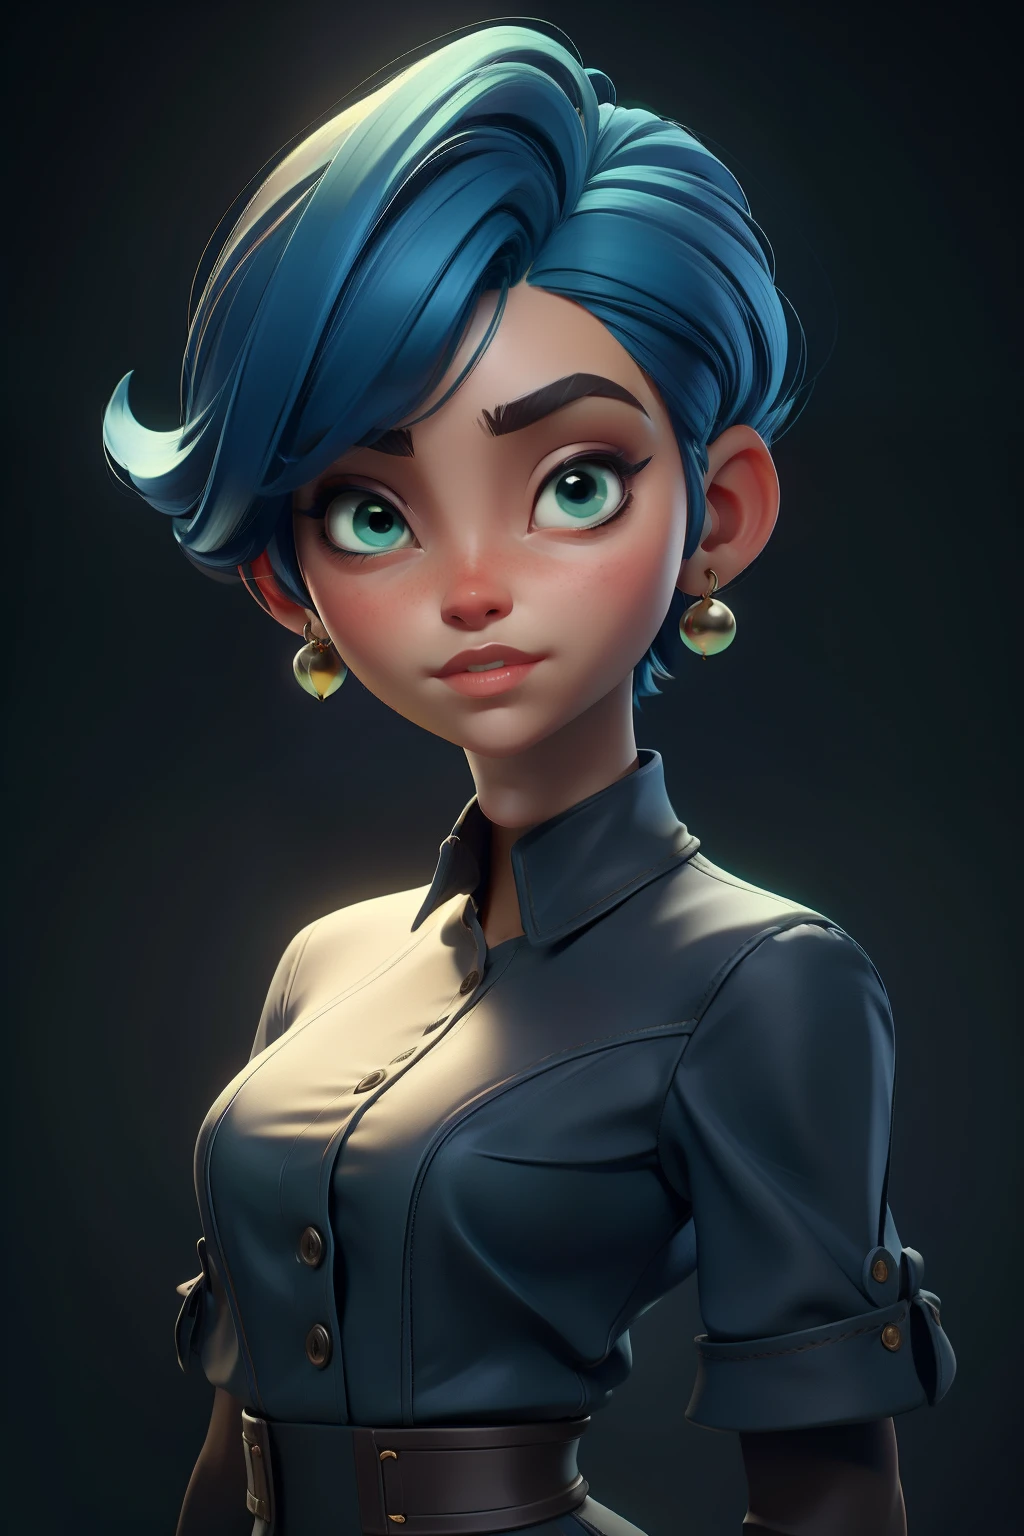 charachter. de corpo inteiro, 3D style face,  sweet and delicate, with long colored hair,chocolate,Short blue hair,black t-shirt,green eyes,Round metal earrings,Silent colors